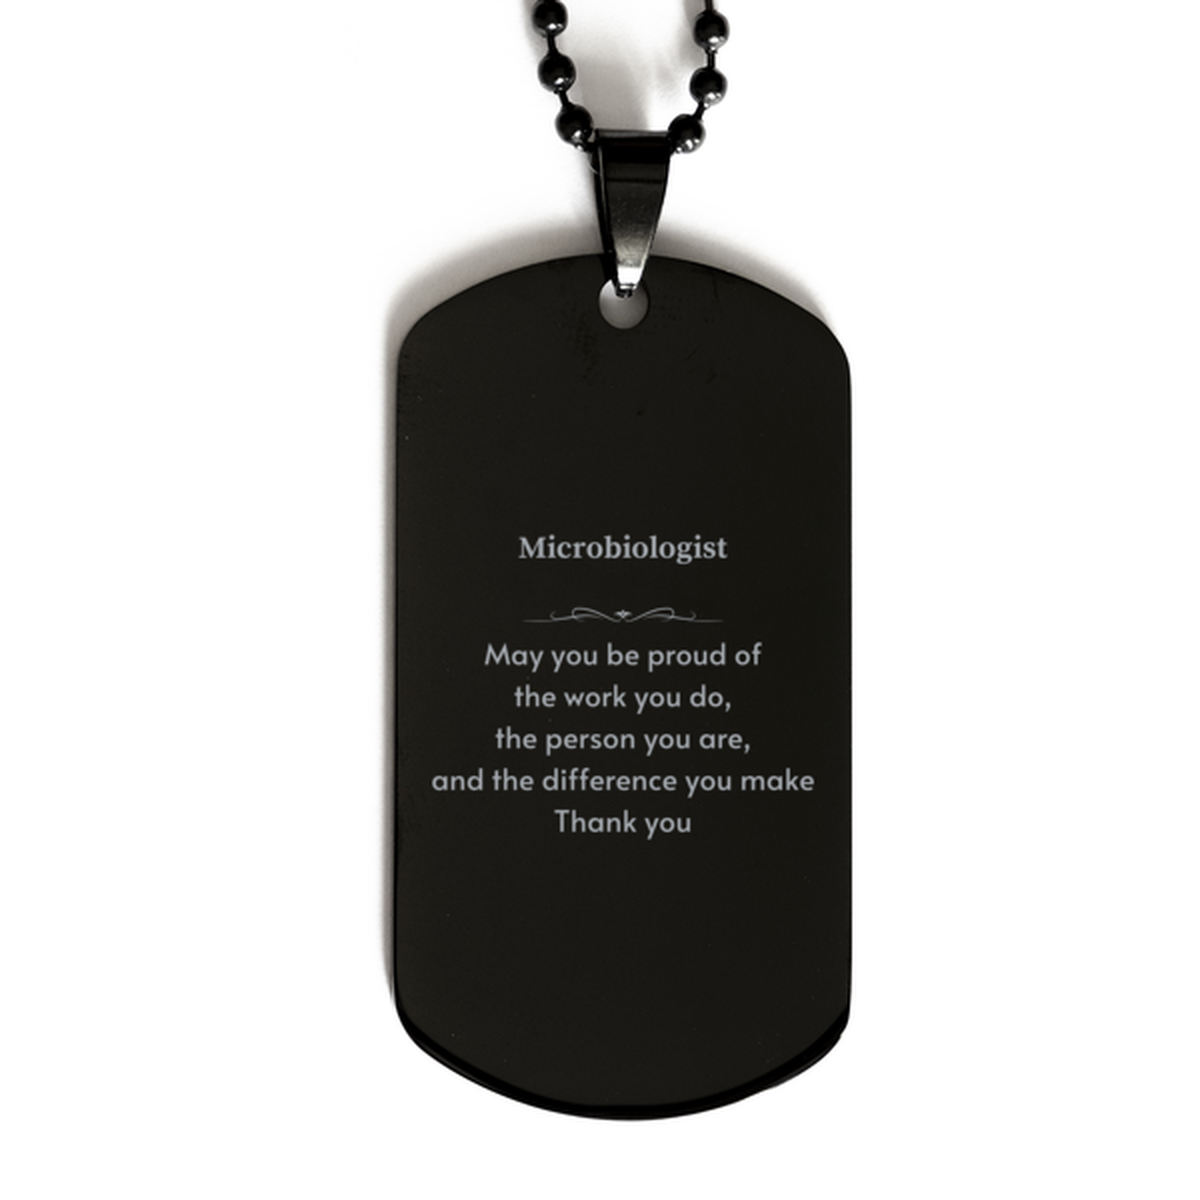 Heartwarming Black Dog Tag Retirement Coworkers Gifts for Microbiologist, Microbiologist May You be proud of the work you do, the person you are Gifts for Boss Men Women Friends